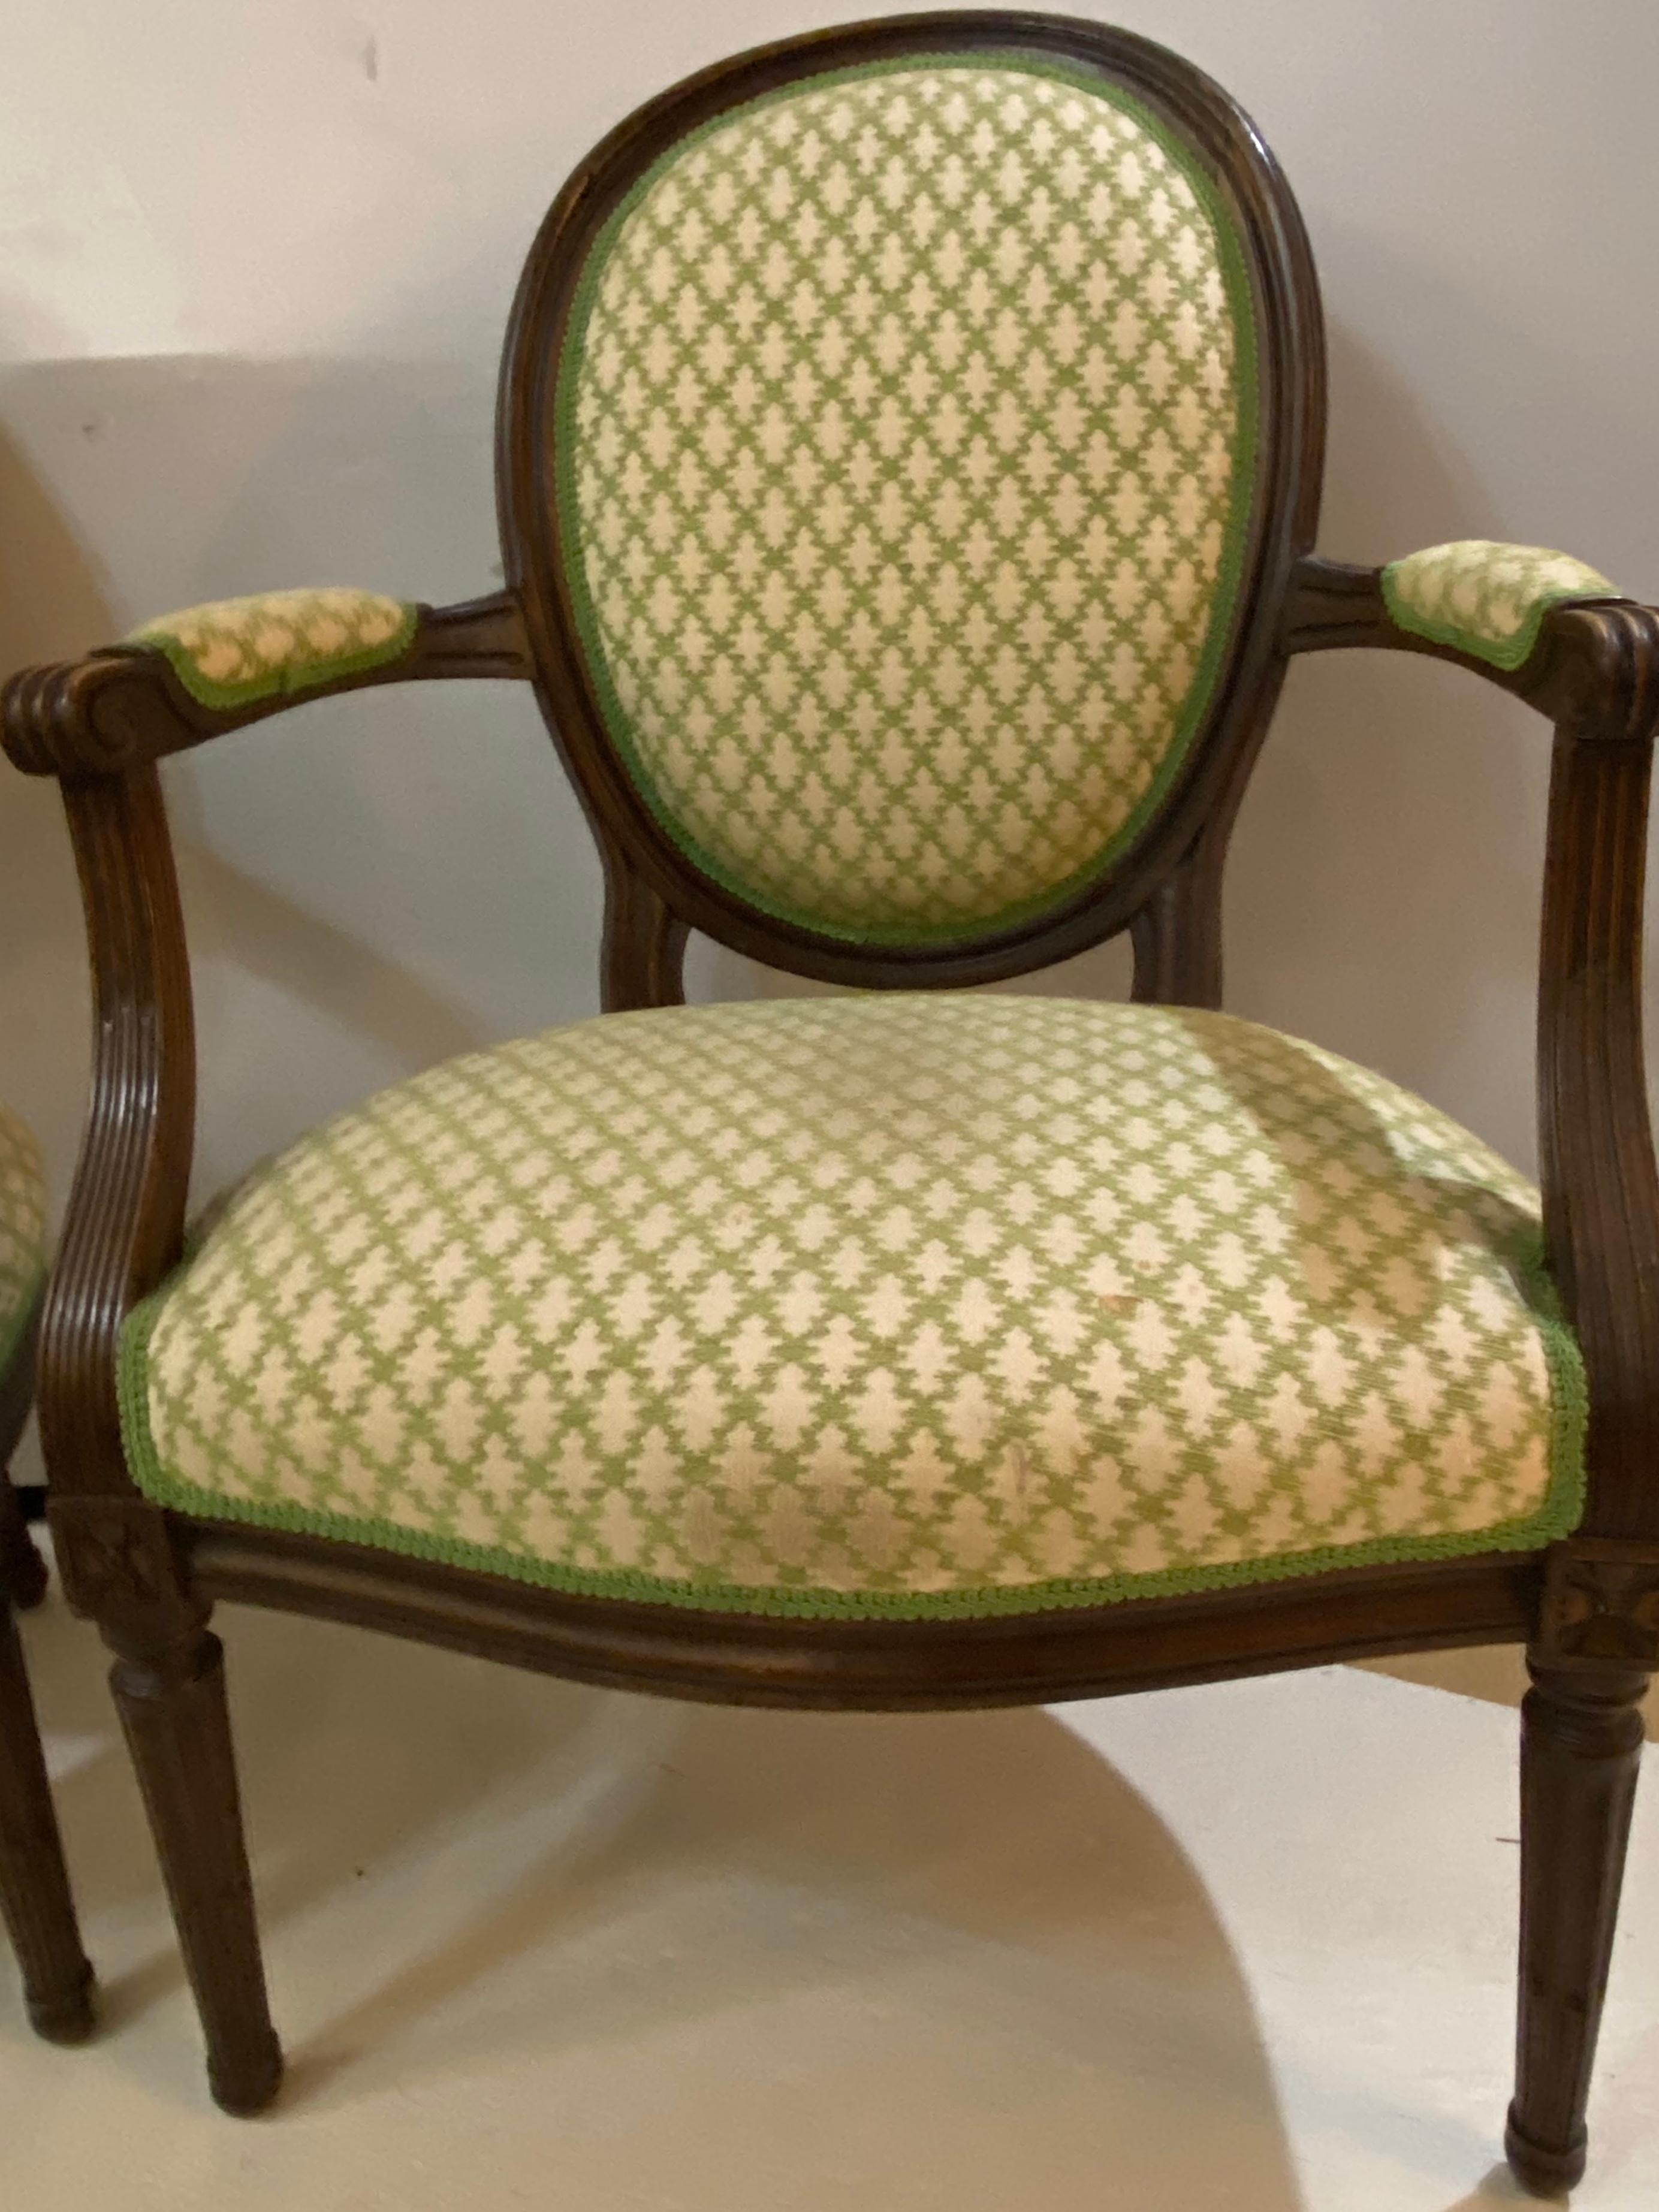 Pair of French Maison Jansen bergeres or armchairs in walnut. Stamped JANSEN on the bottoms and fashioned in the Louis XVI style these simple and stylish armchairs can support the look of any living area and would be lovely in front and back of a